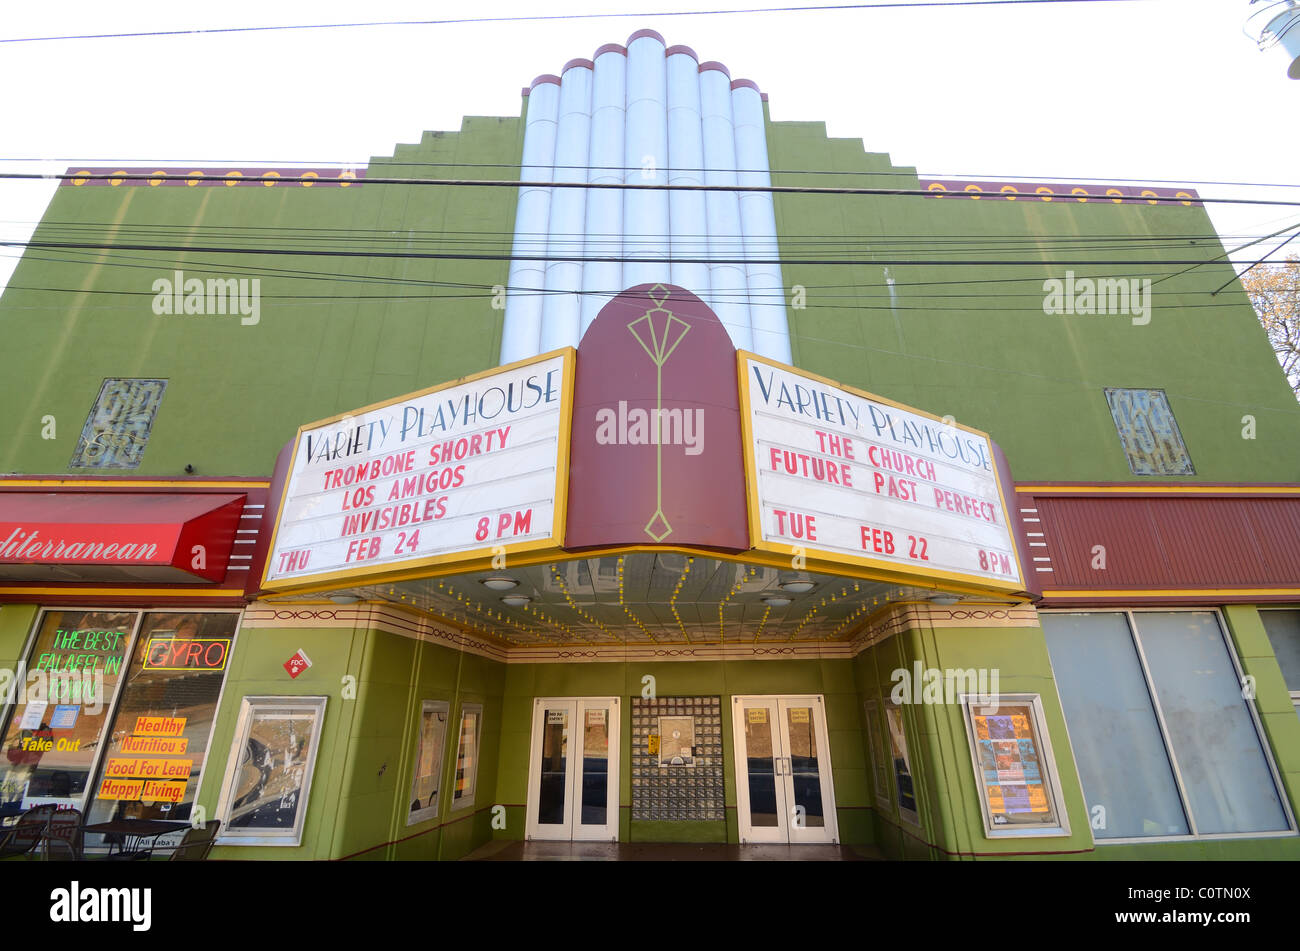 Variety Playhouse in Atlanta, Georgia is a famed music venue. February 23, 2011. Stock Photo